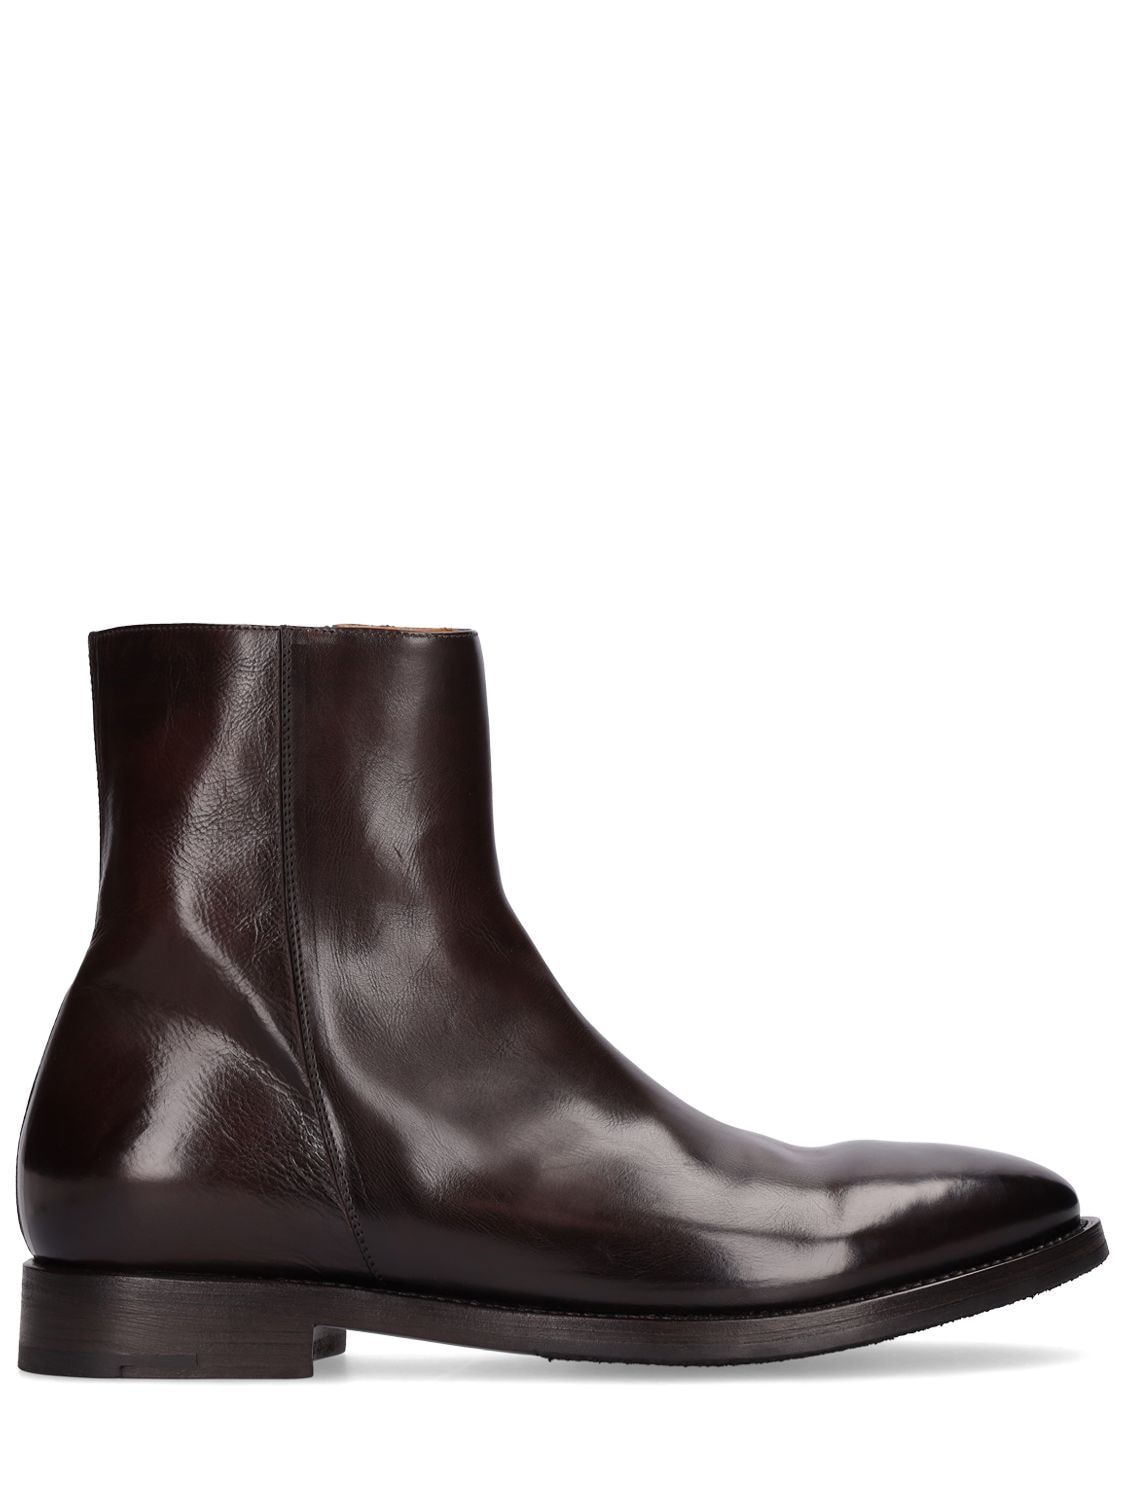 Alberto Fasciani Leather Ankle Boots W/ Side Zip In Brown